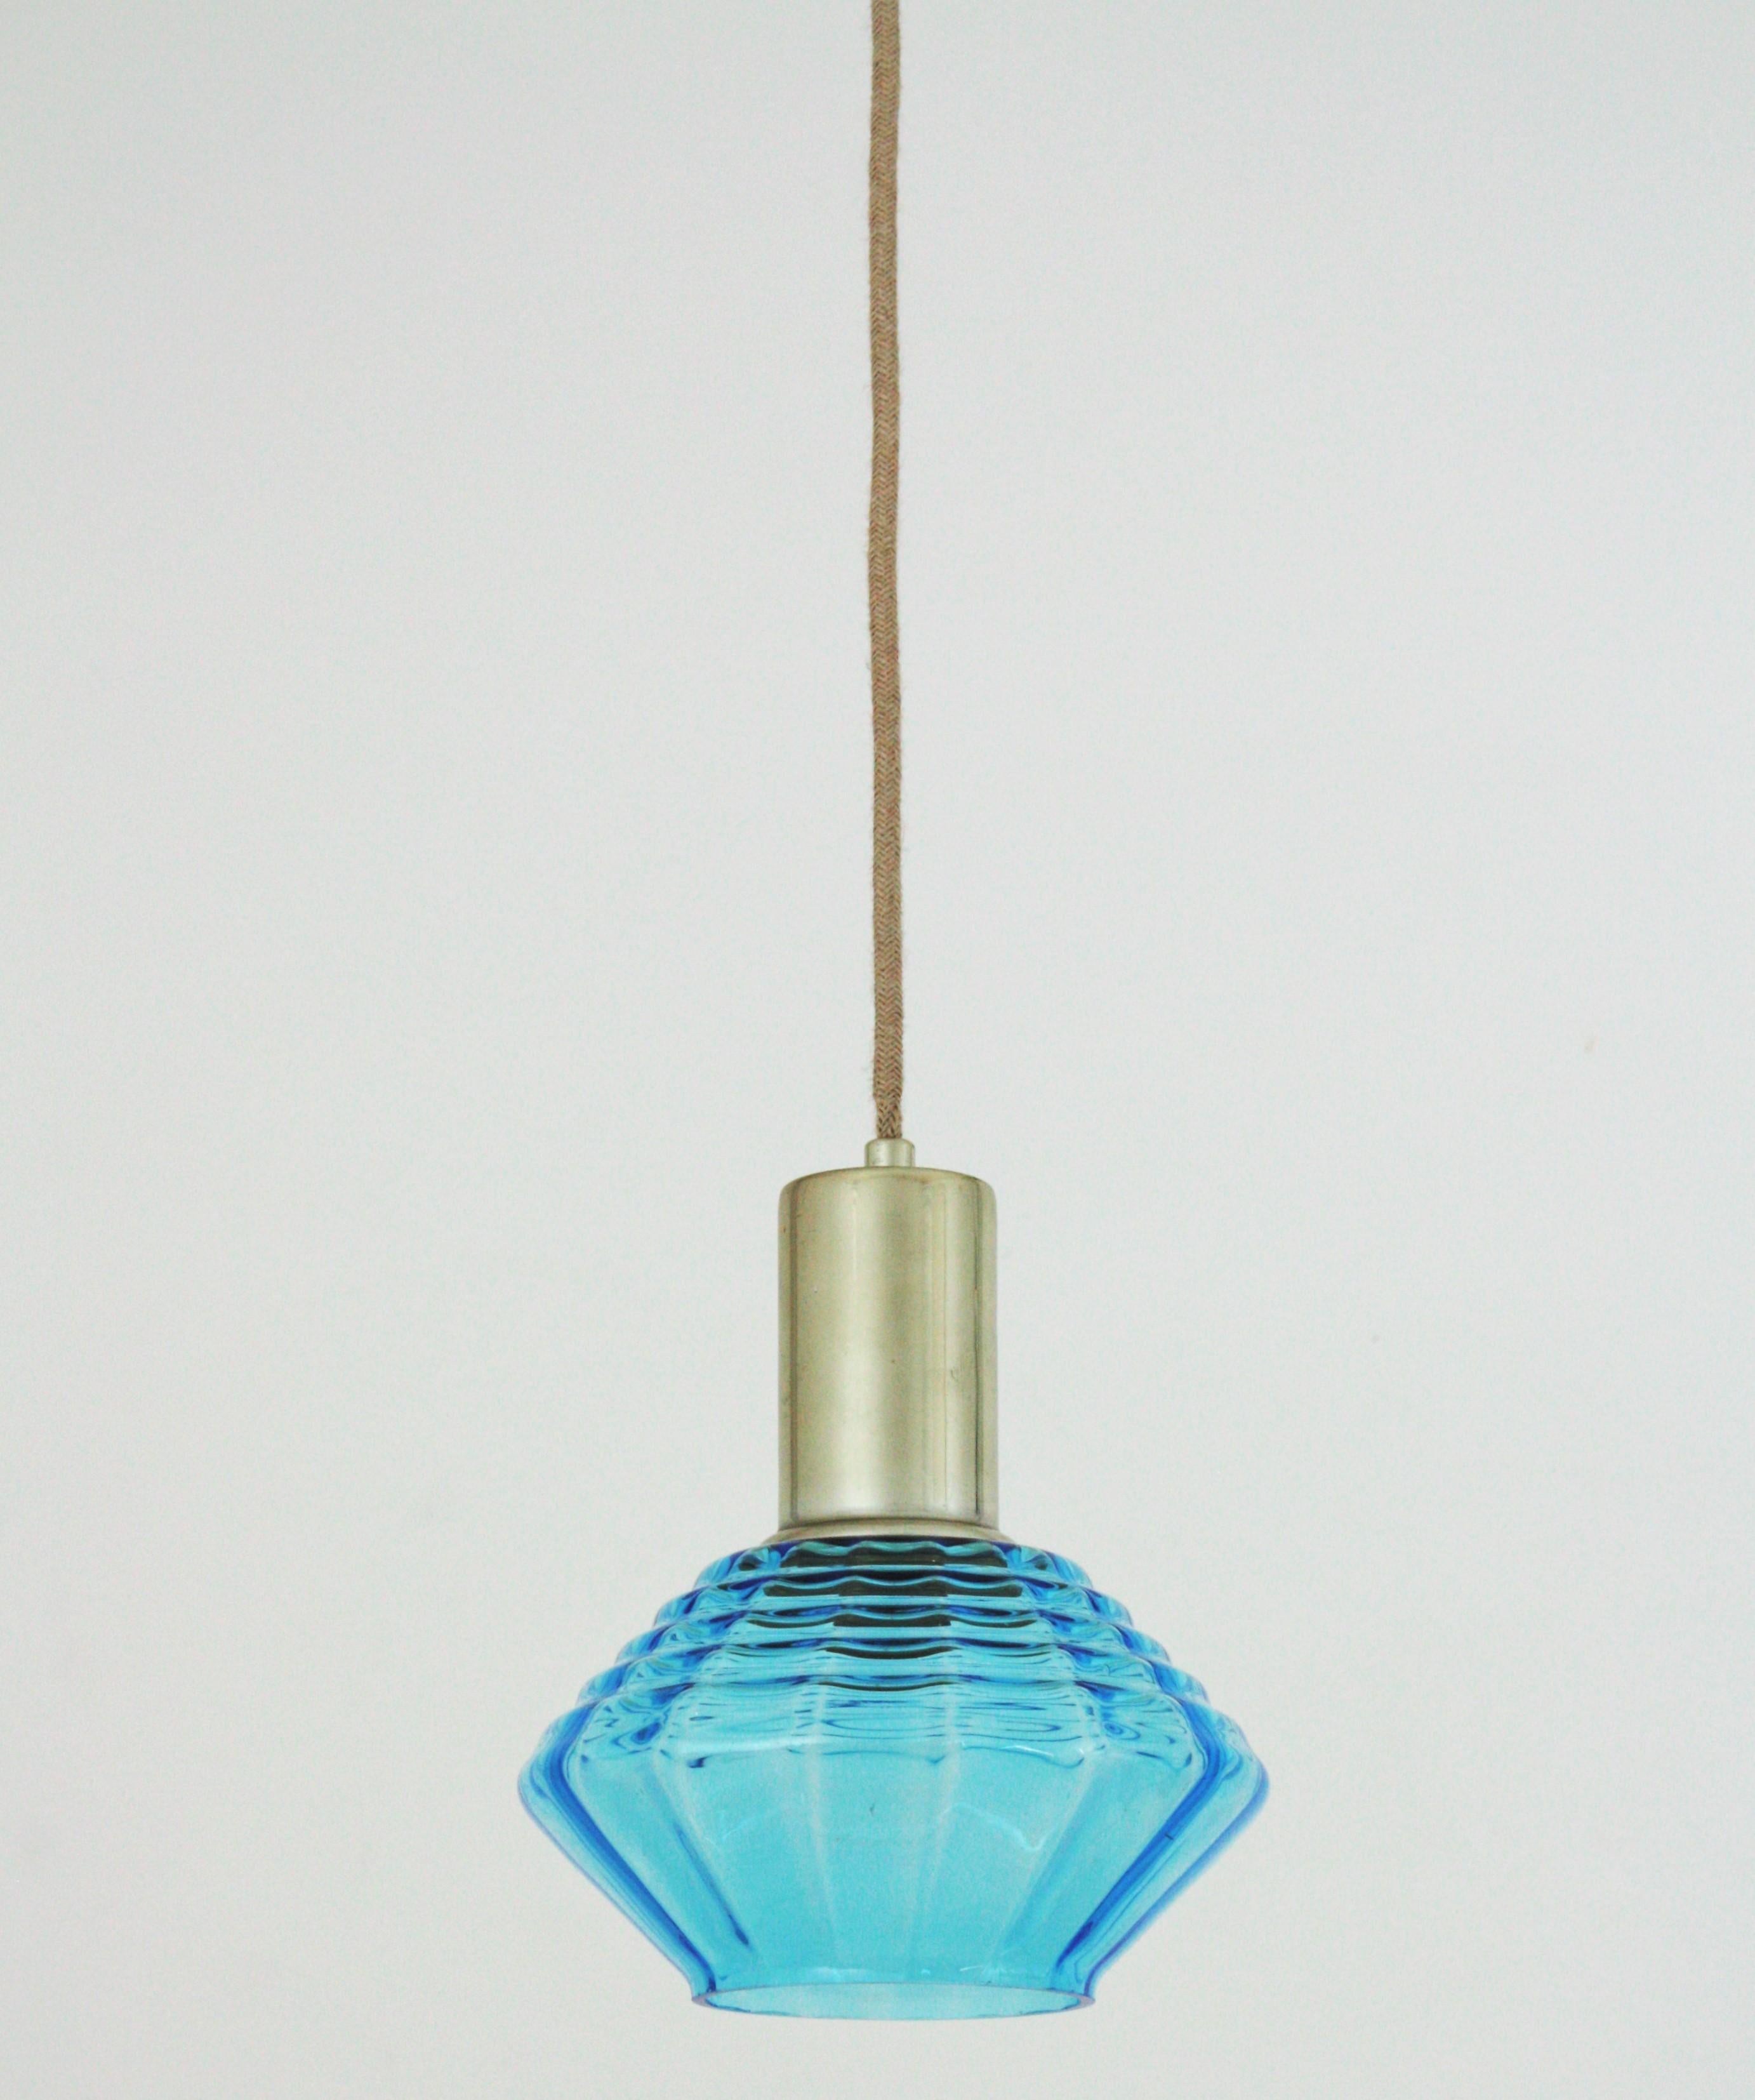 20th Century Italian Modern Blue Glass and Chrome Suspension / Pendant Lamp For Sale